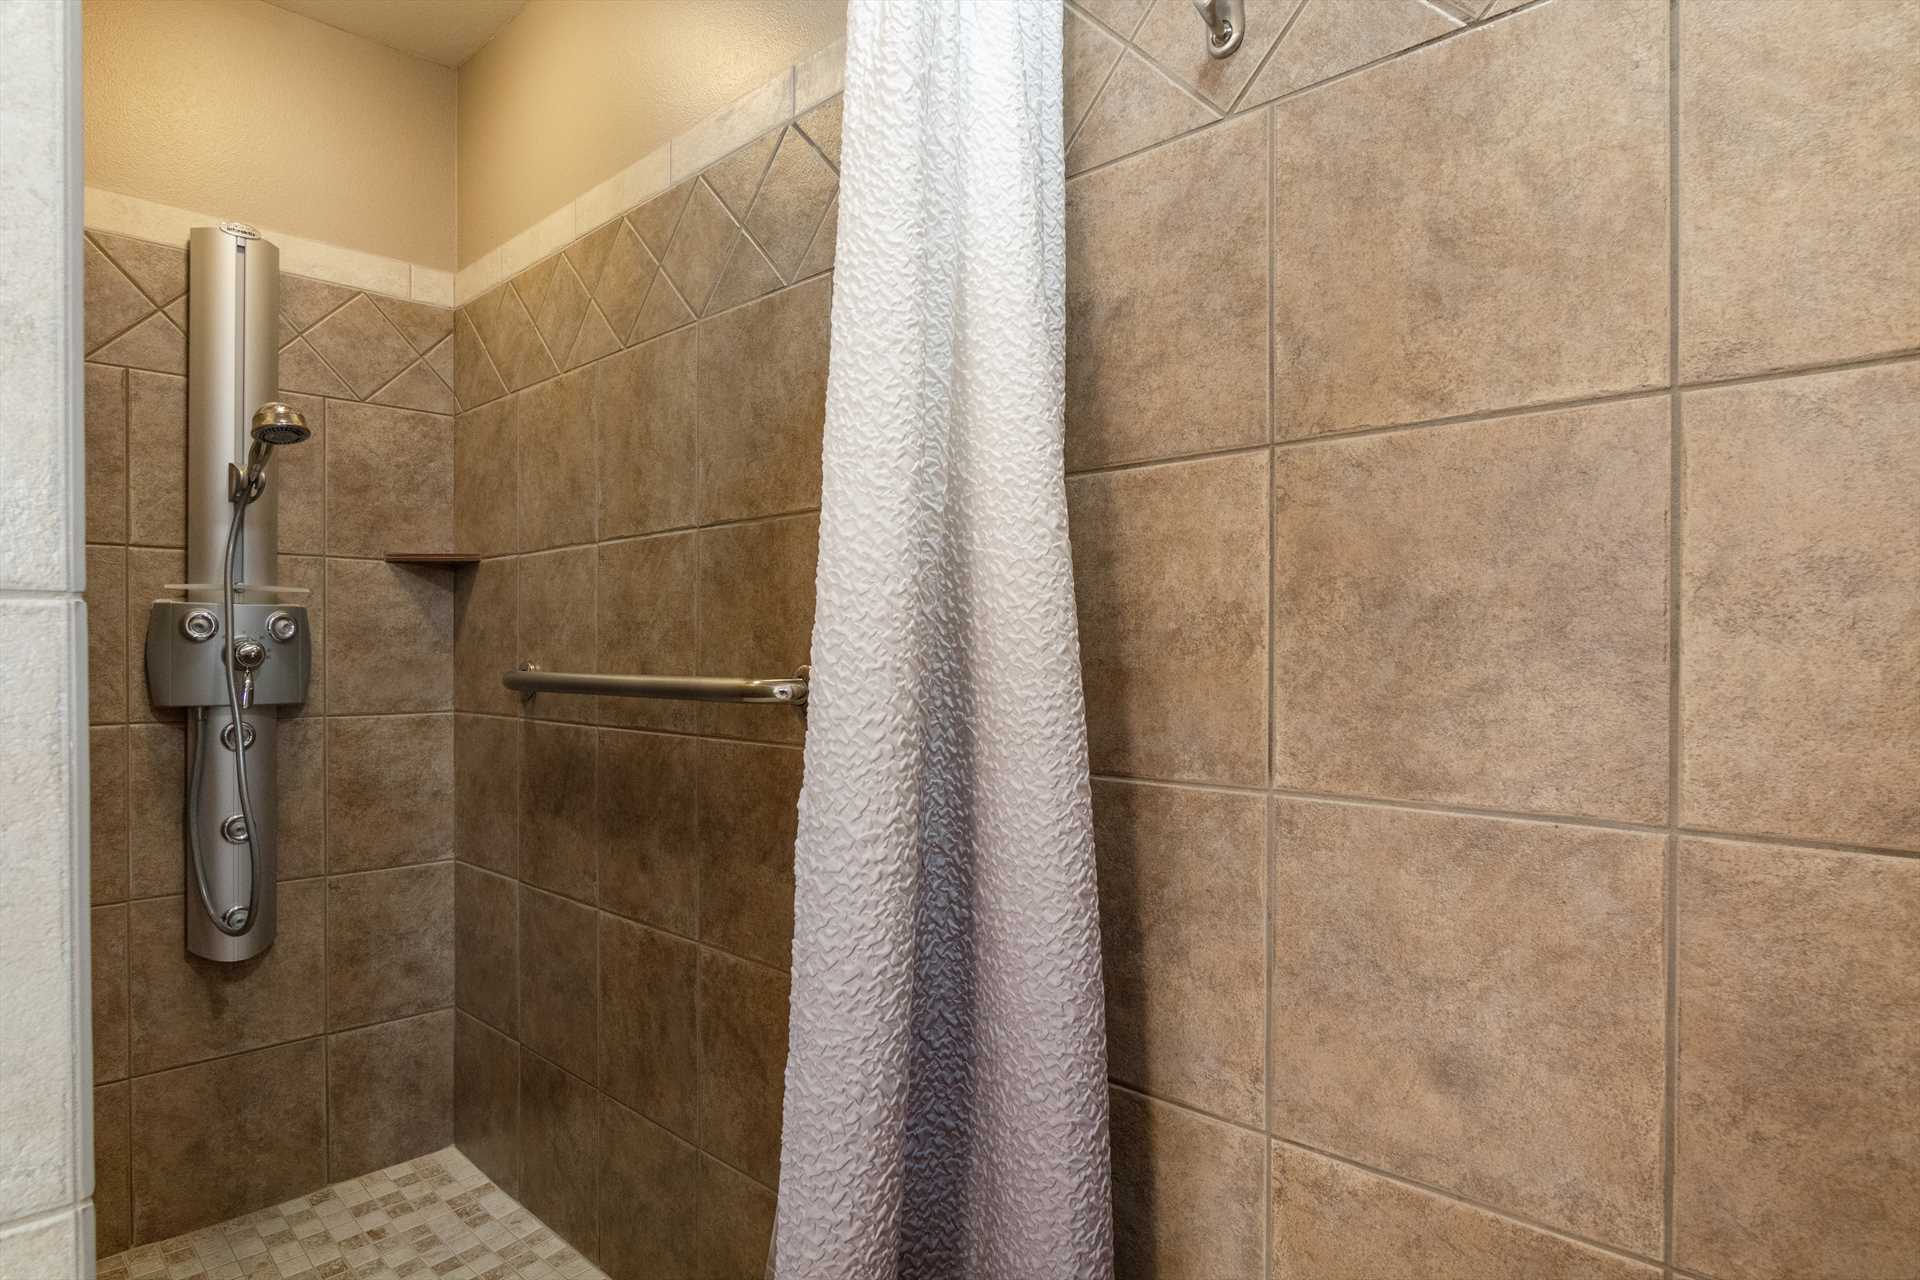                                                 A full-sized walk-in shower is the central cleanup feature in the first full bath.